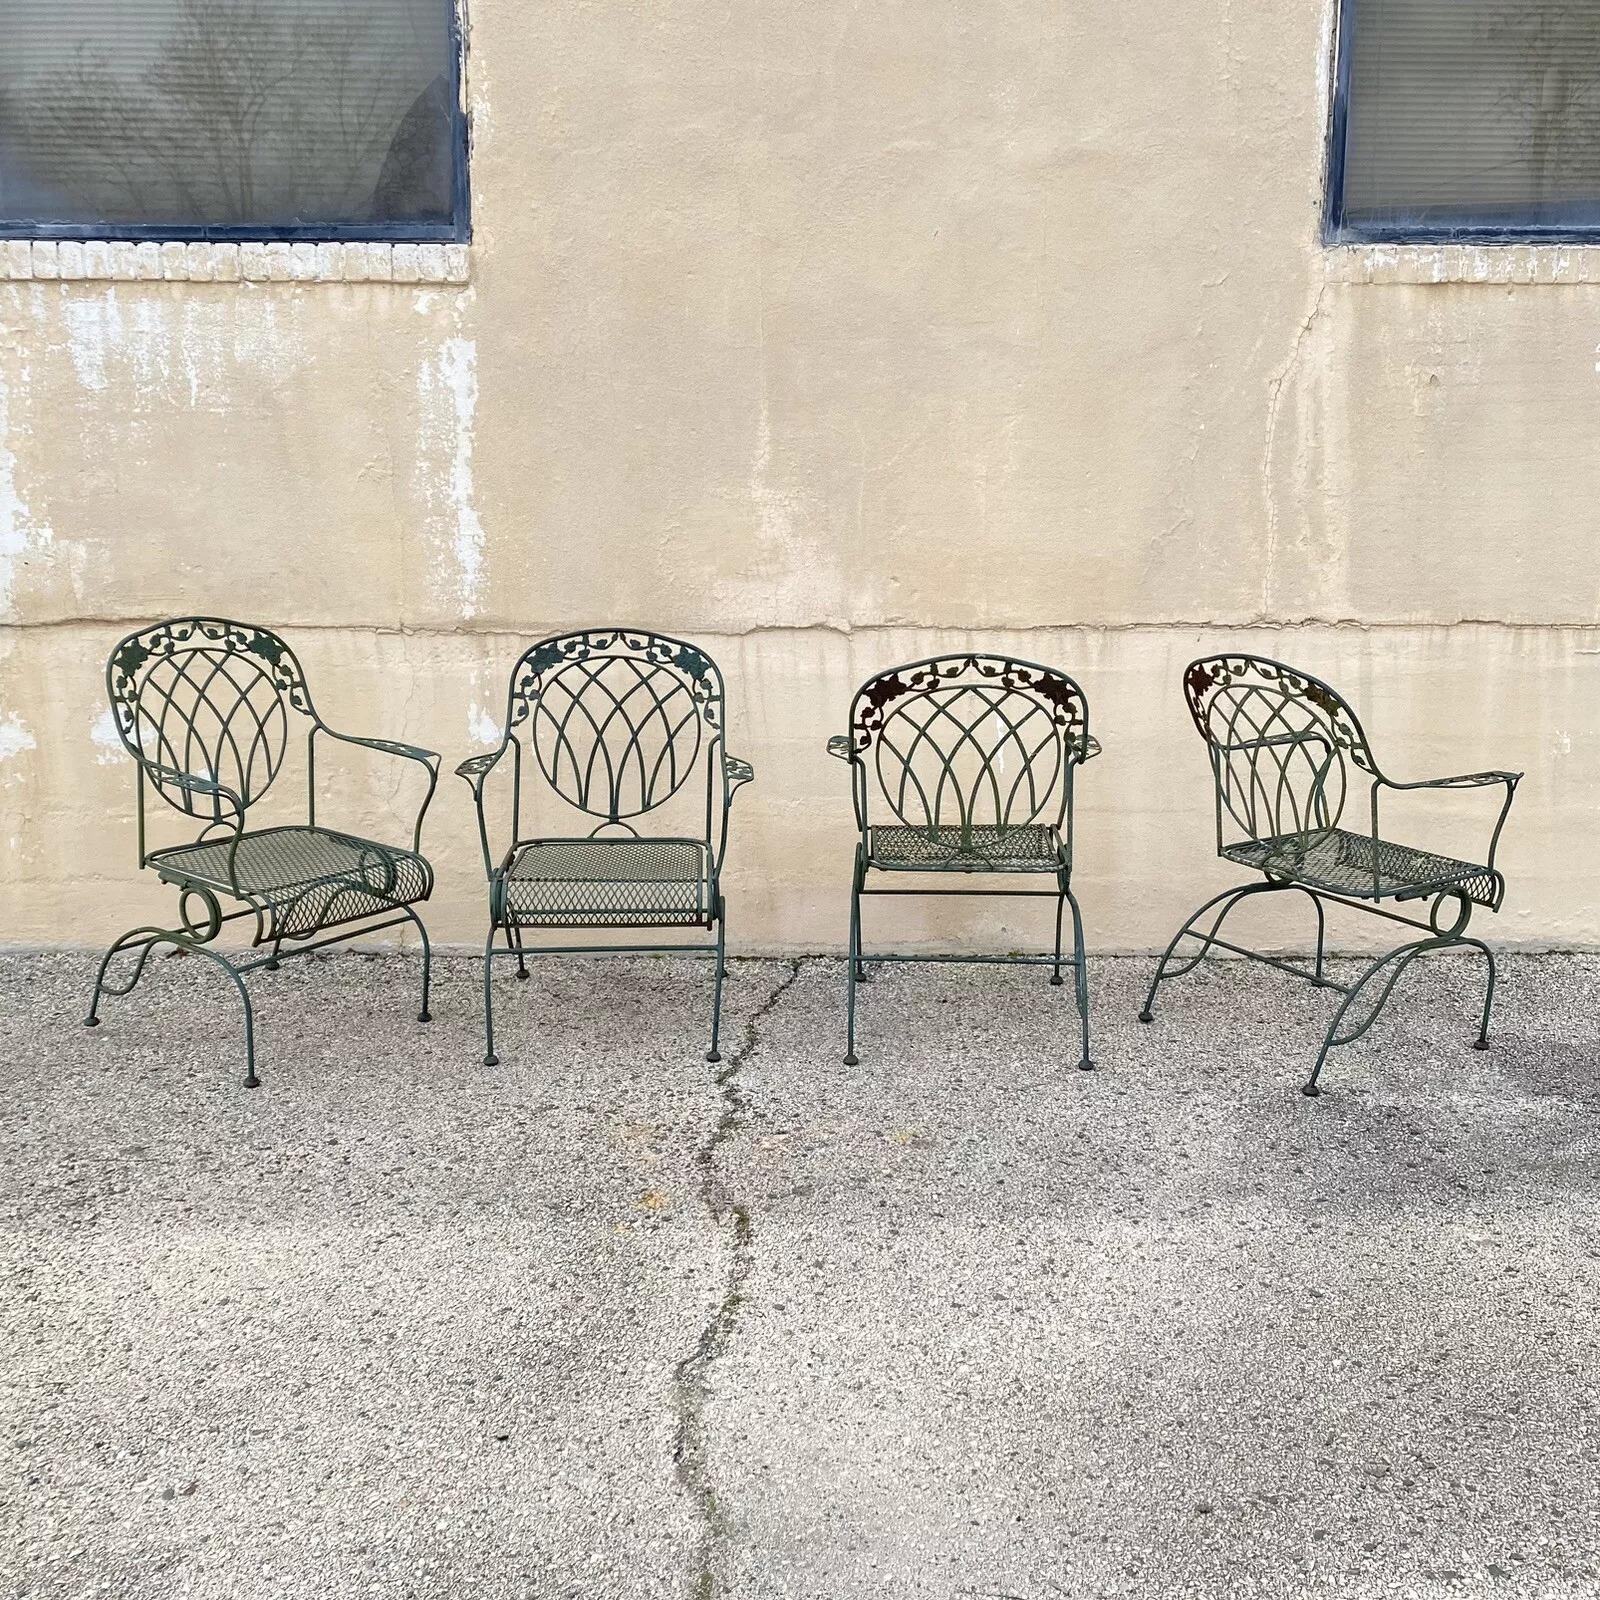 Vintage Wrought Iron Green Victorian Woodard Rose Style Garden Patio Springer Chairs - Set of 4. Circa Late 20th Century. Dimensions : 37